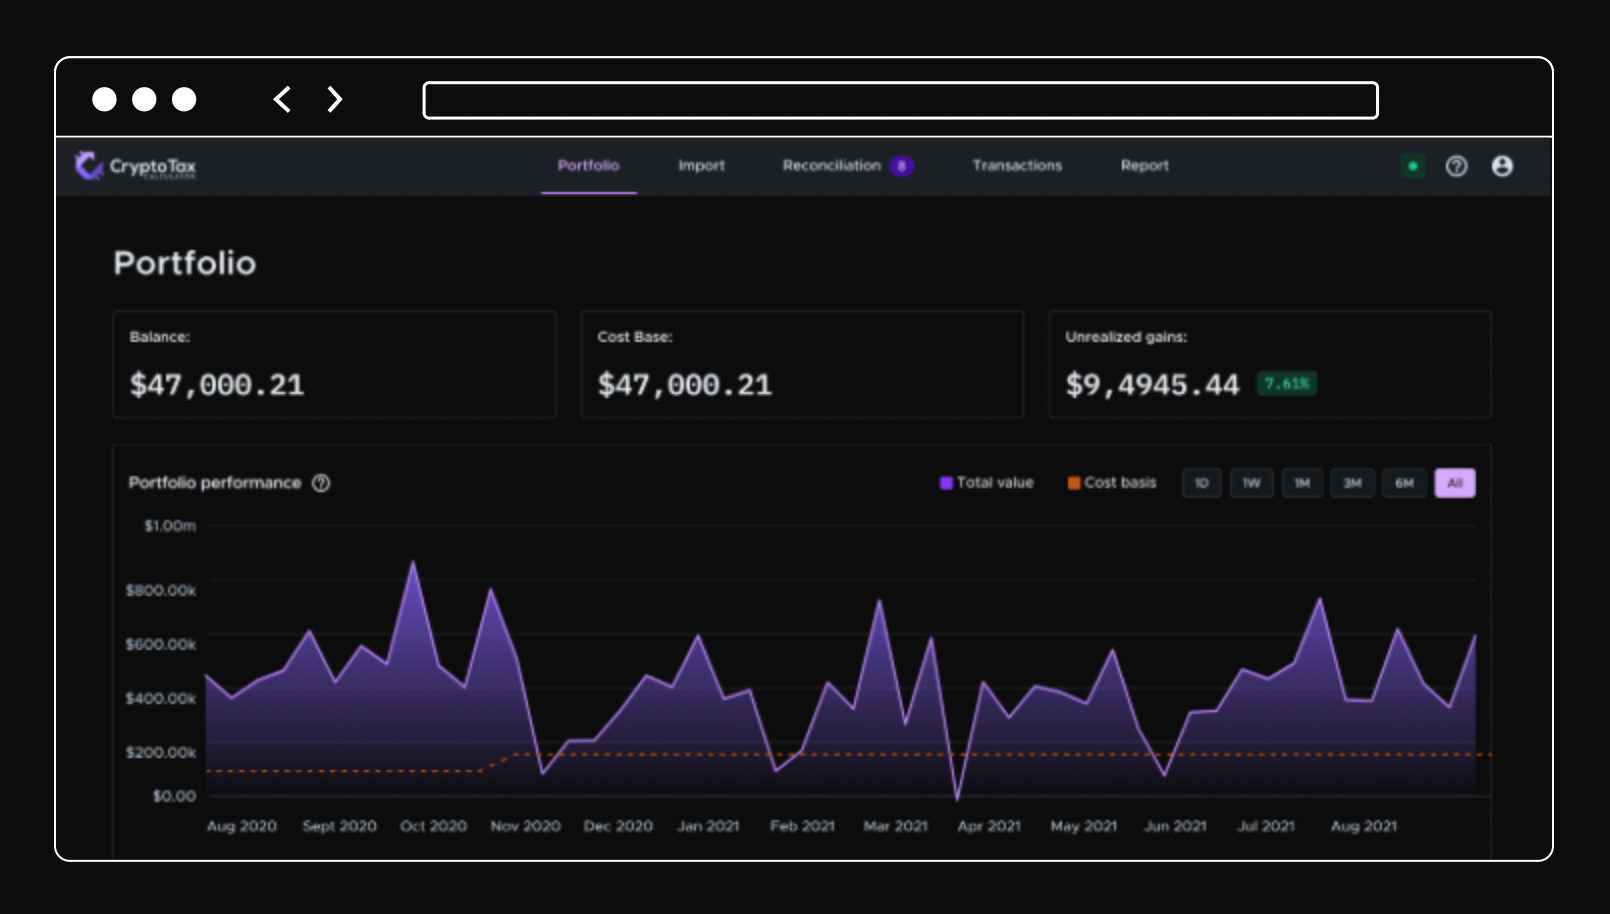 Image of CryptoTaxCalculator’s dashboard with sample data